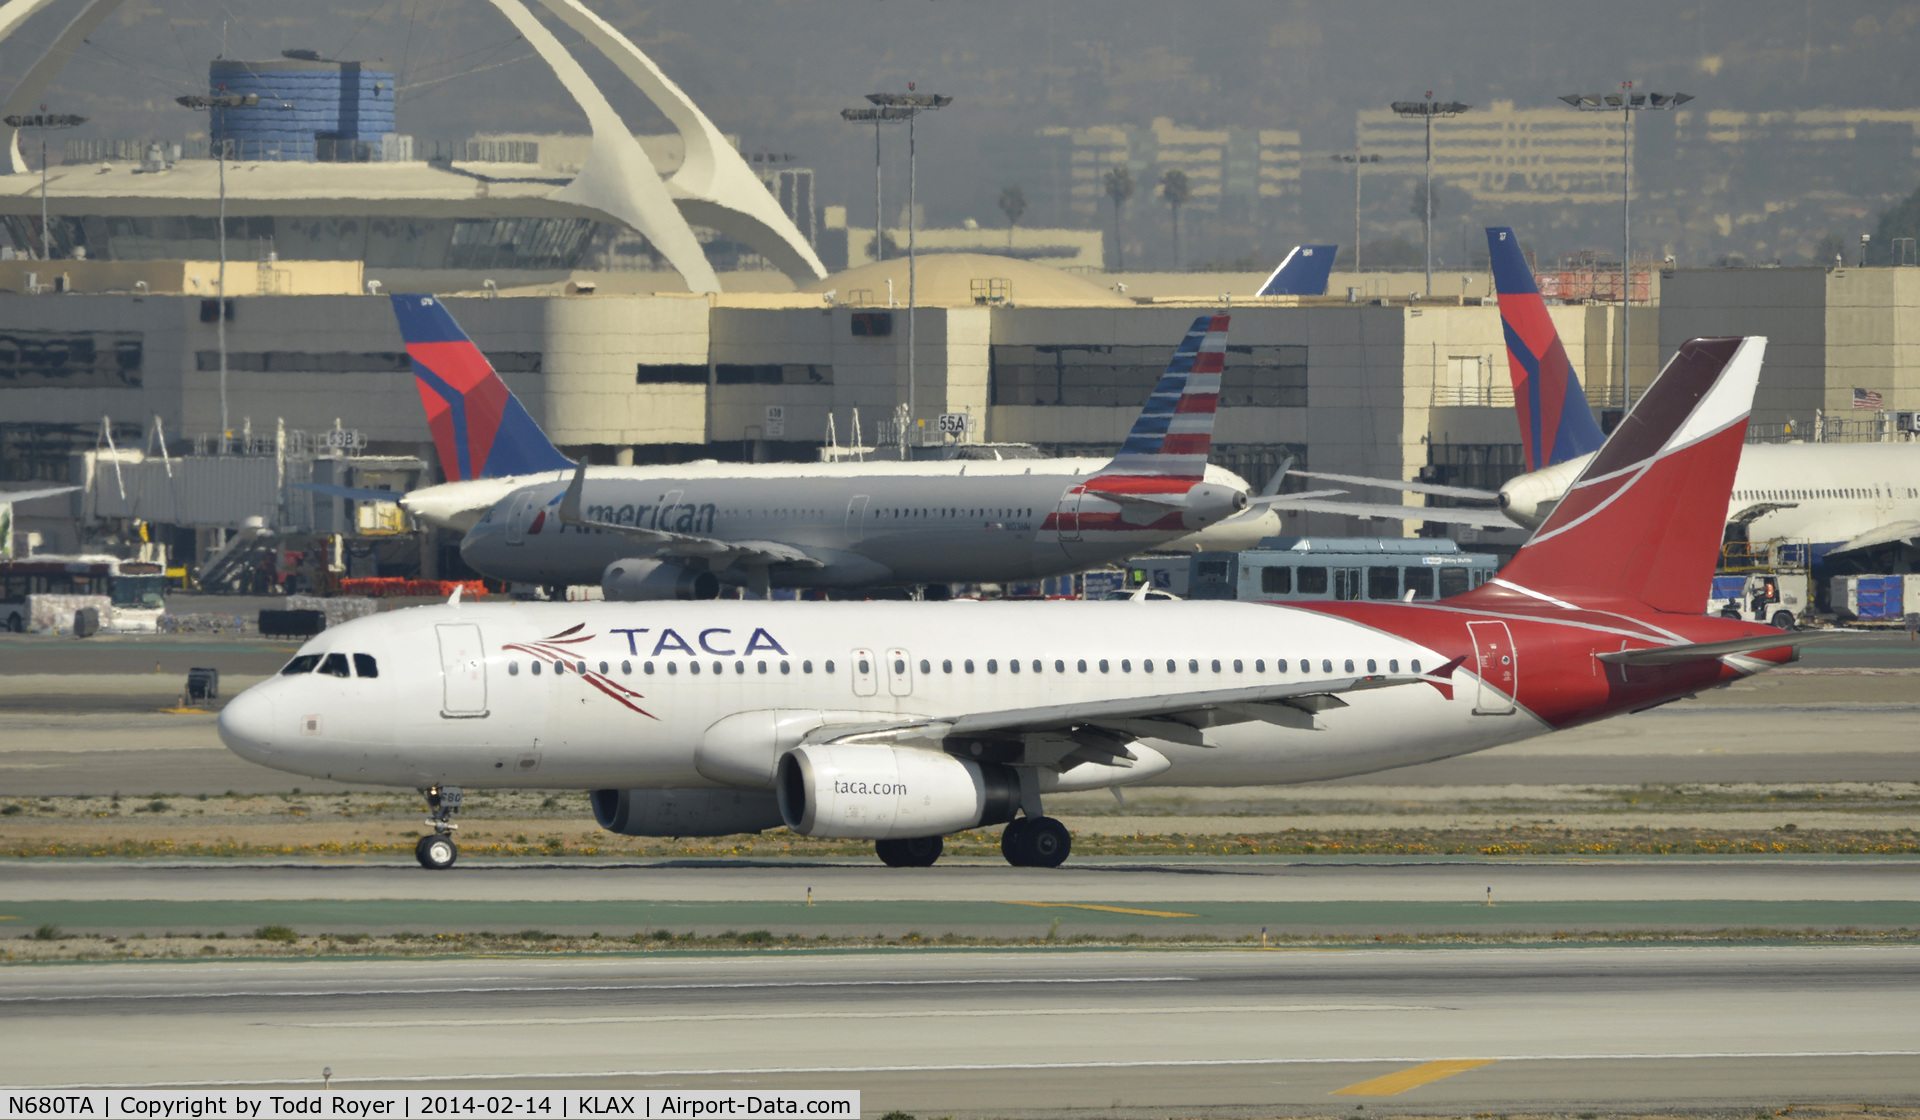 N680TA, 2008 Airbus A320-233 C/N 3538, Taxiing to parking at LAX